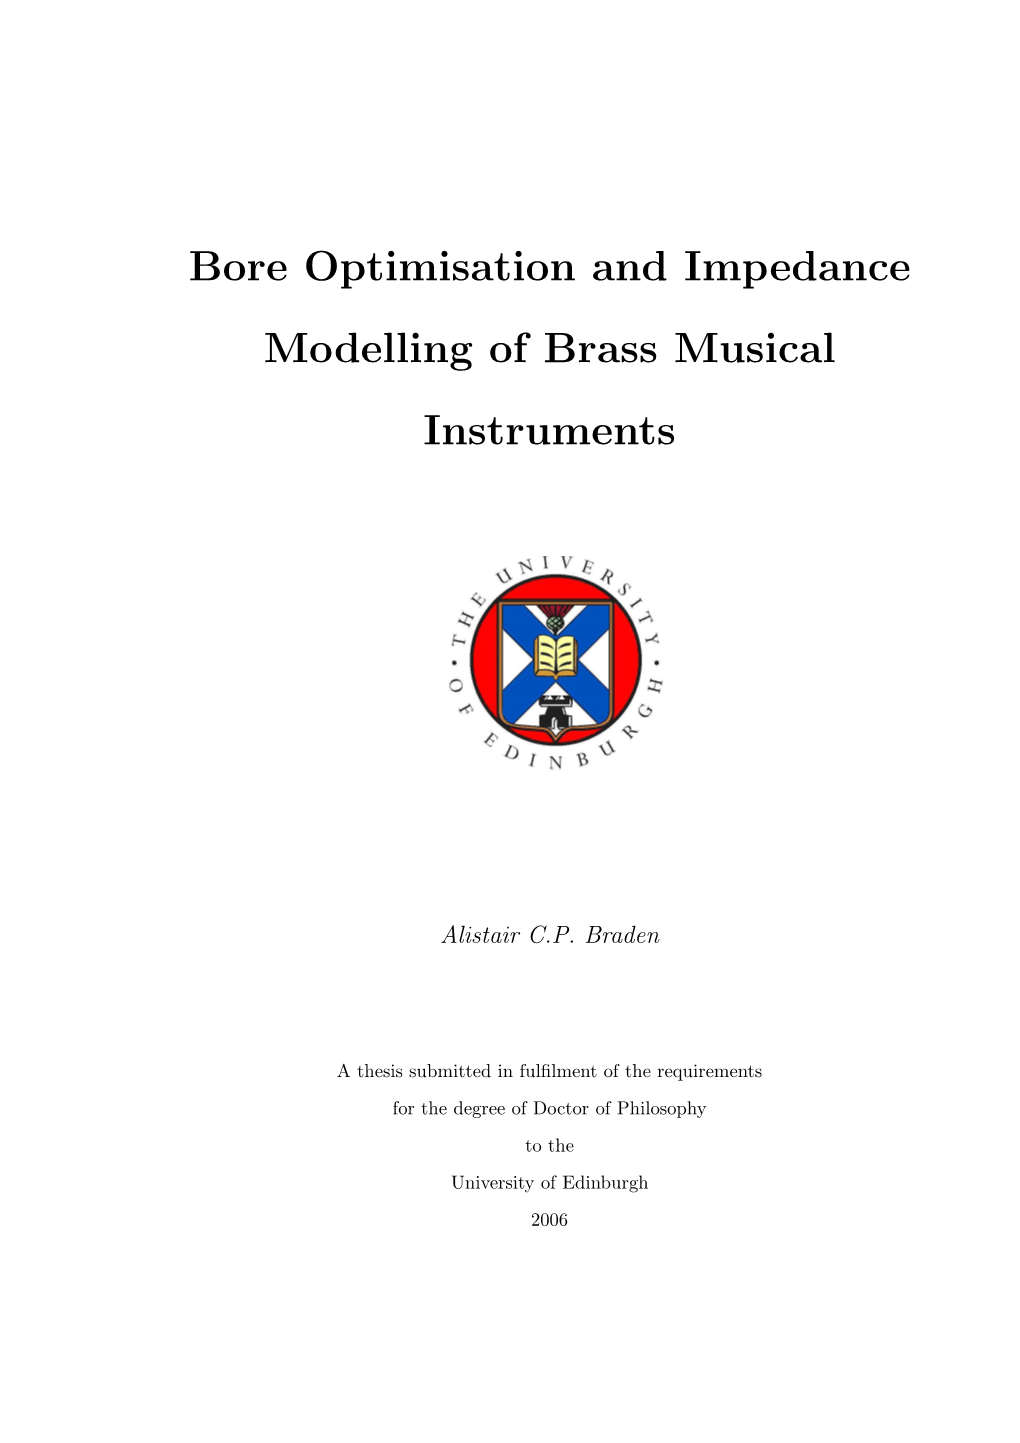 Bore Optimisation and Impedance Modelling of Brass Musical Instruments